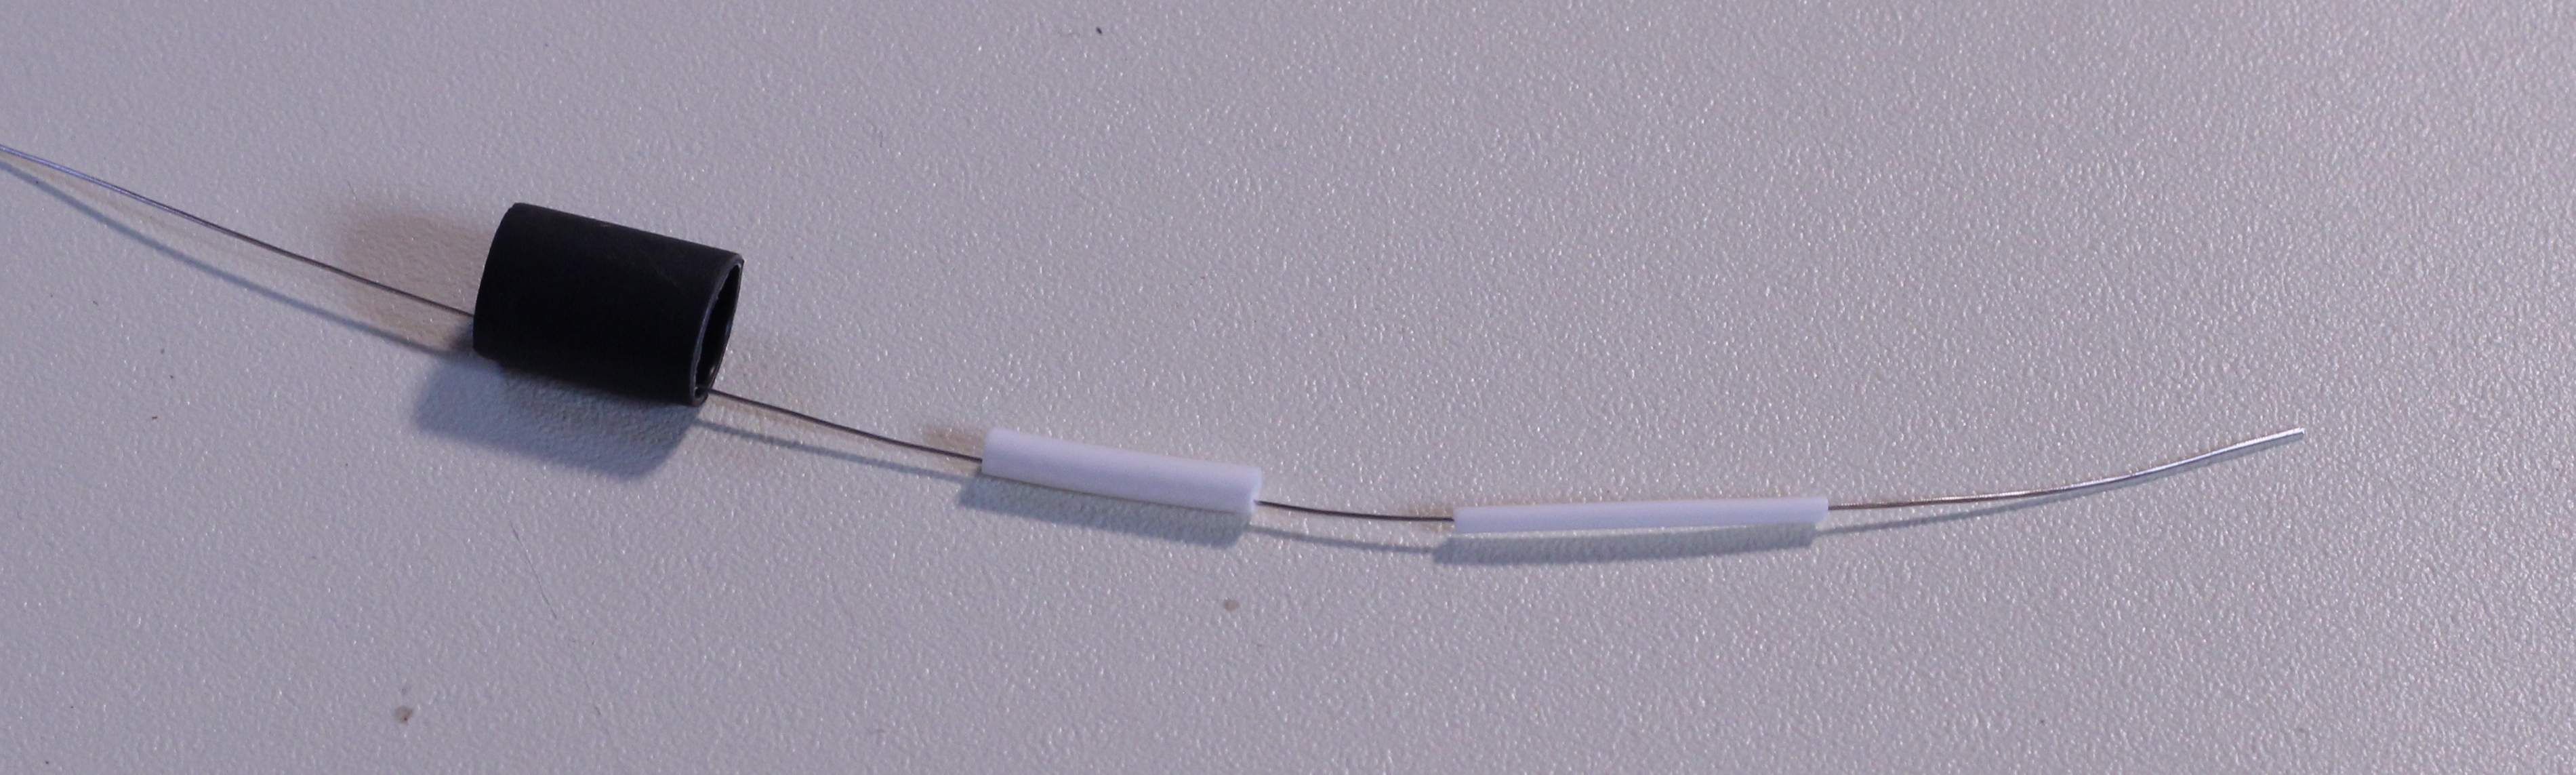 Coaxial cable with strain relief tubing.